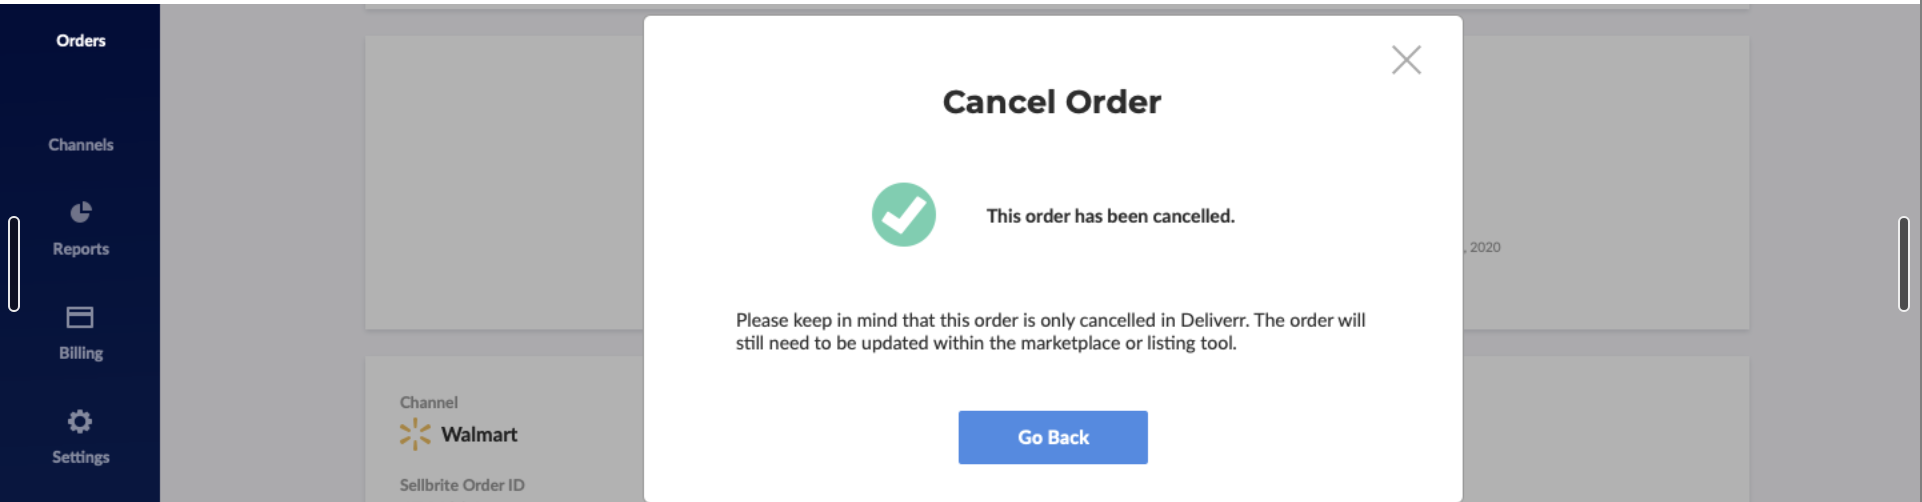 Order_Cancelled.png